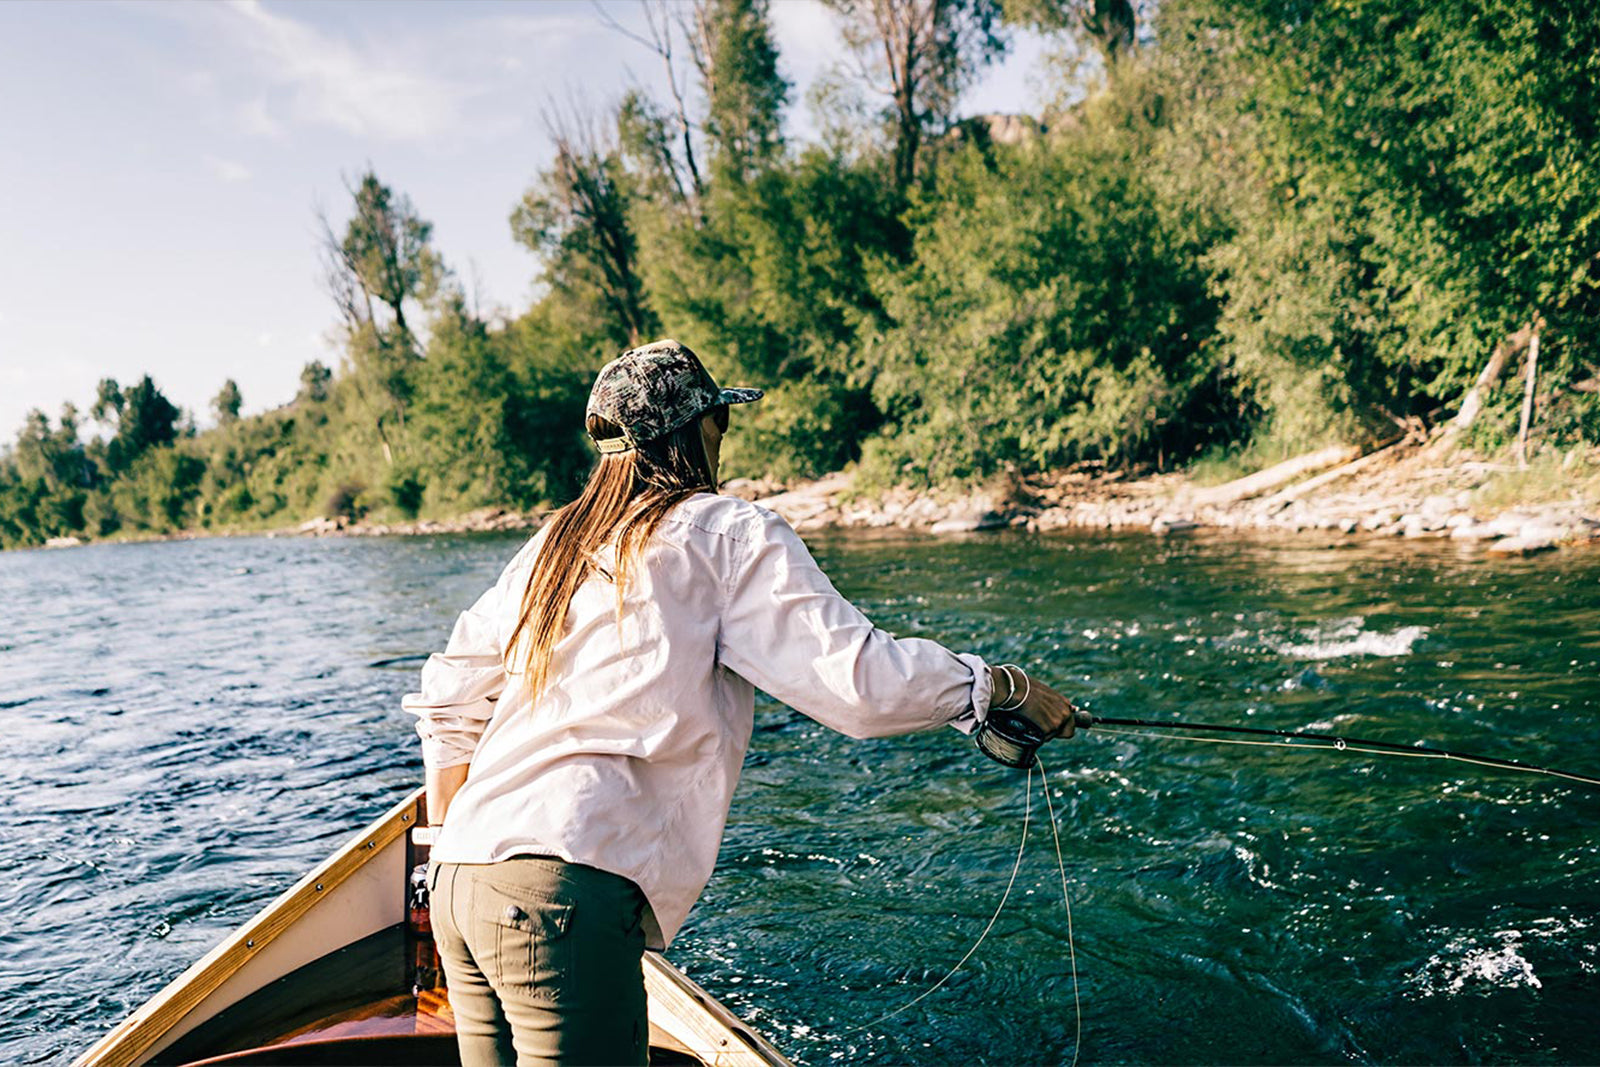 WHY MADDIE BRENNEMAN DIDN’T LOVE FLY FISHING…AND HOW IT ALL CHANGED